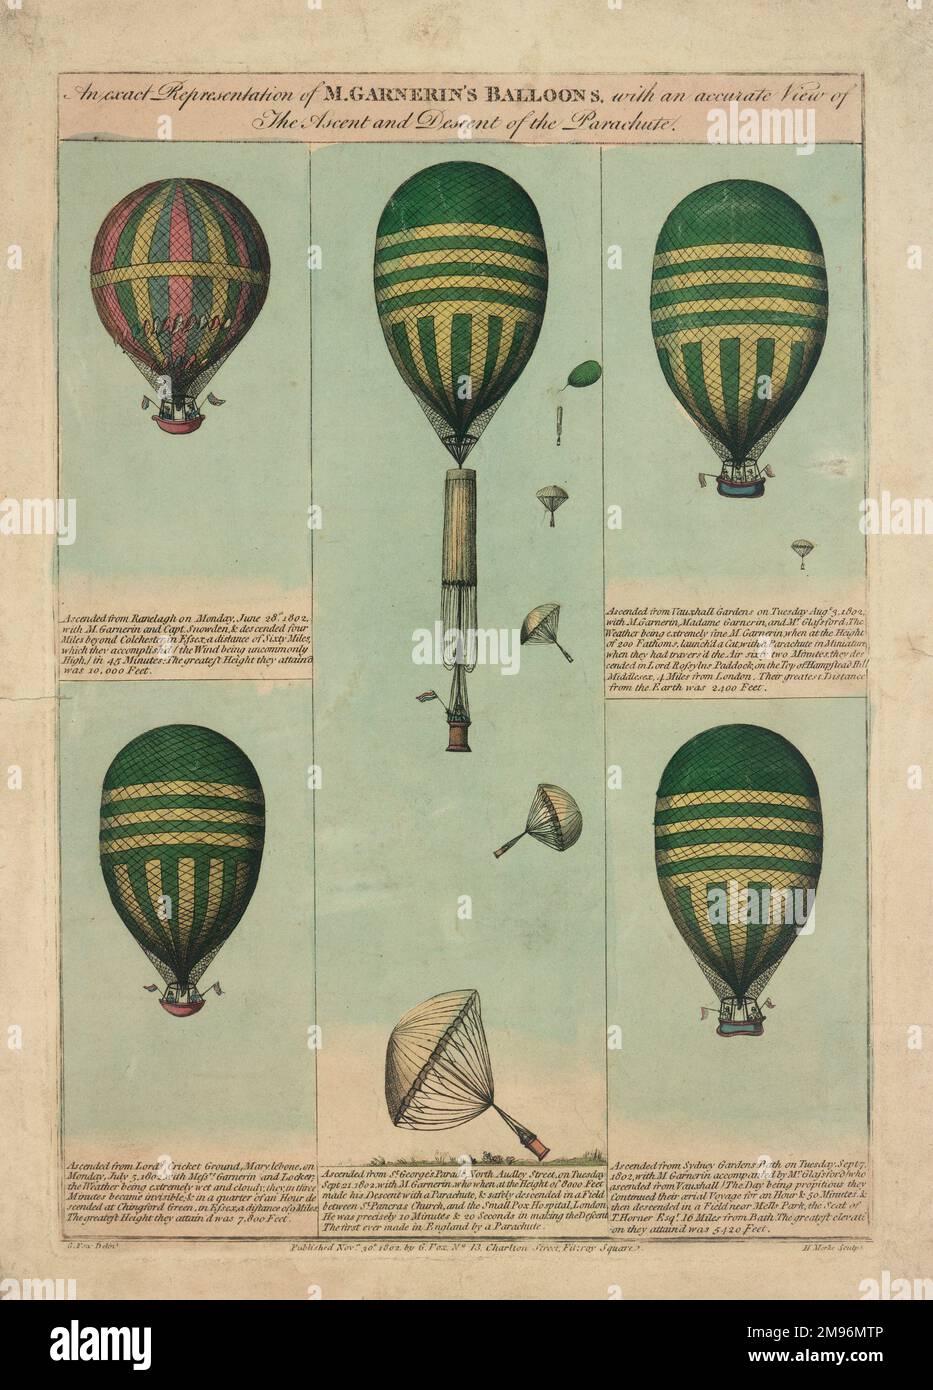 Five illustrations of  'An exact representation of M. Garnerin's Balloons with an accurate view of the ascent and descent of the parachute'.  Top left: ascended from Ranelagh, 28 June 1802, passengers Garnerin and Snowden, landed 45 minutes later near Colchester, Essex.  Bottom left: ascended from Lord's Cricket Ground, 5 July 1802, passengers Garnerin and Locker, landed 15 minutes later at Chingford Green, Essex.  Centre: ascended from North Audley Street, 21 September 1802, passenger Garnerin, landed 10 minutes later in a parachute near St Pancras Church -- claimed to be the first parachut Stock Photo